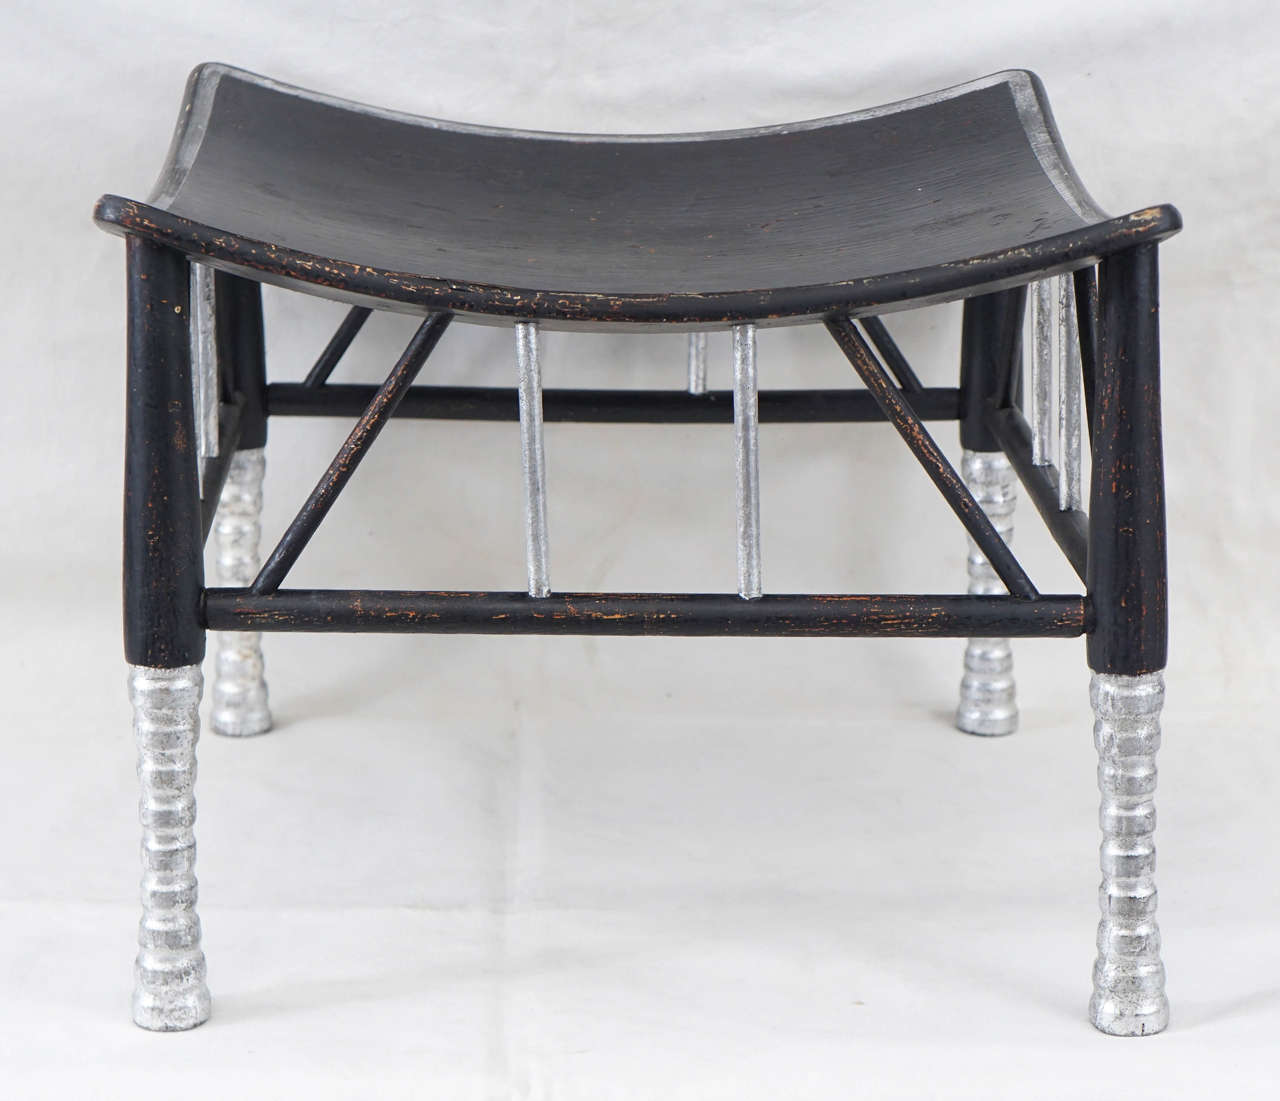 This stool made by Liberty & Company is most likely from the early part of the 20th century. Once in wood tones the stool was redecorated and comes soon after the discovery of Tutankhamun's Tomb by Howard Carter. The black and silver decoration is